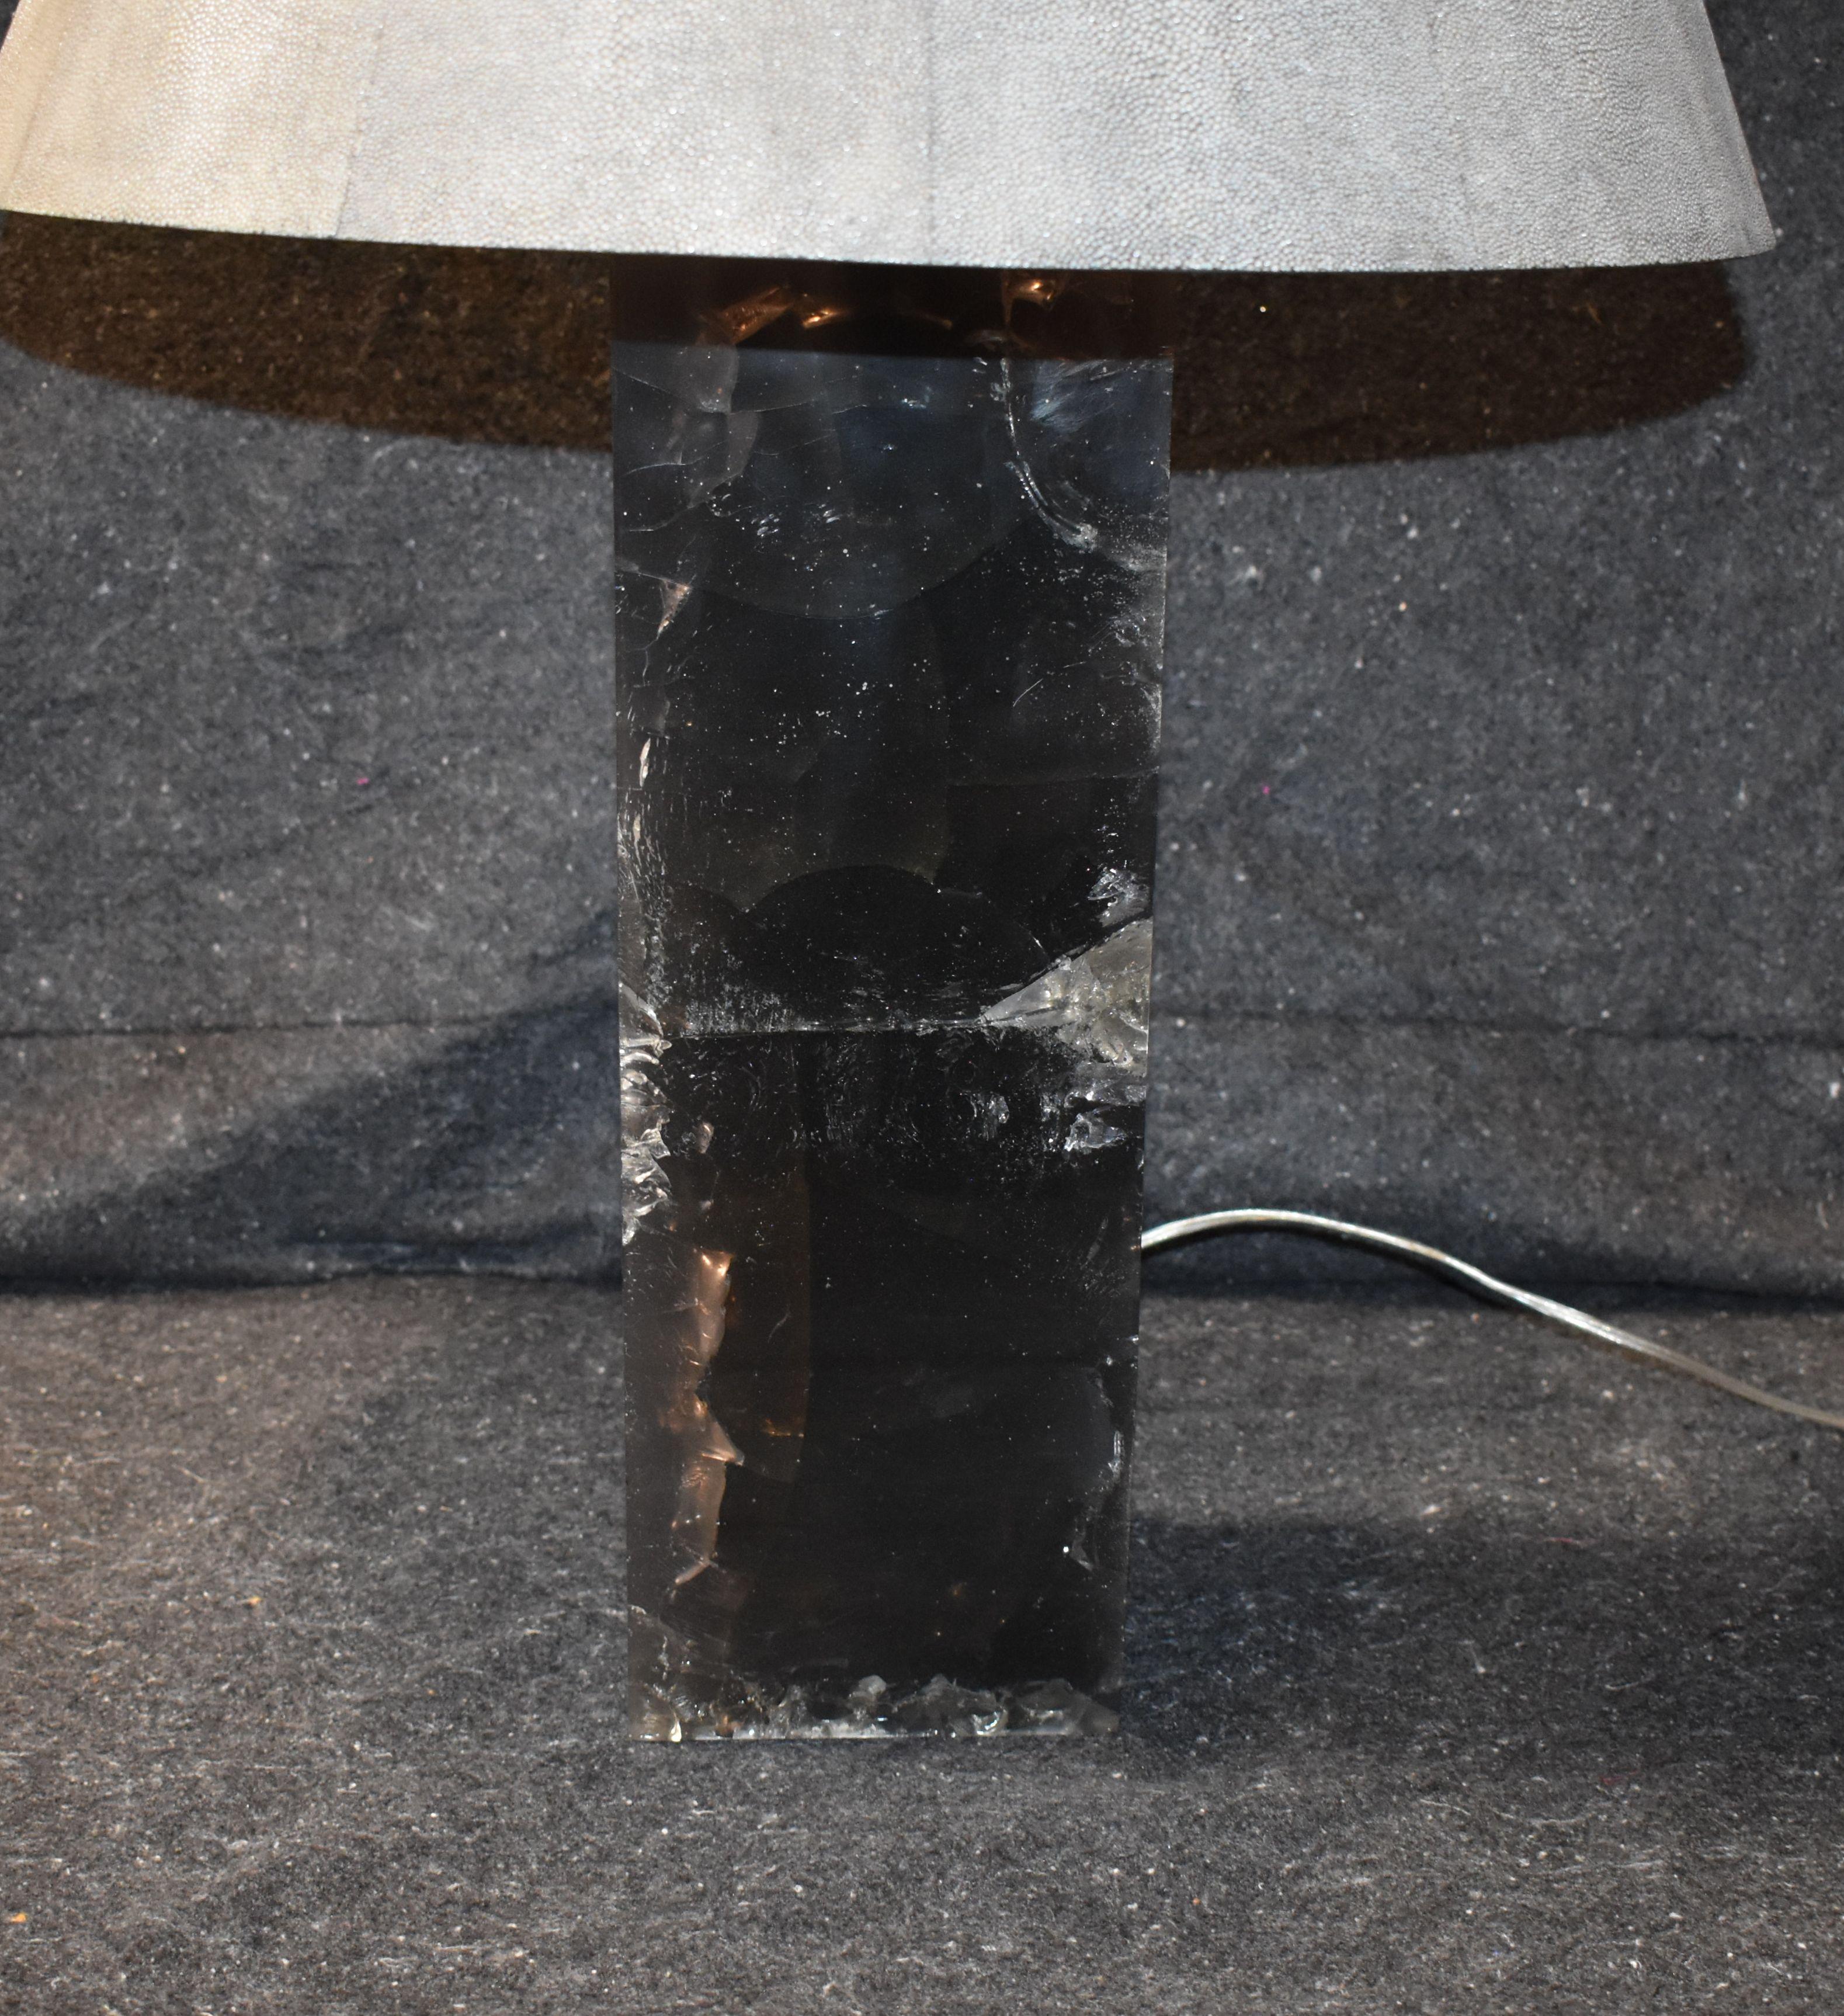 Sculptural light and dark gray ice cracked resin table lamp with shagreen shade.

Dimension of lamp without shade W 6 inches, D 6 inches.